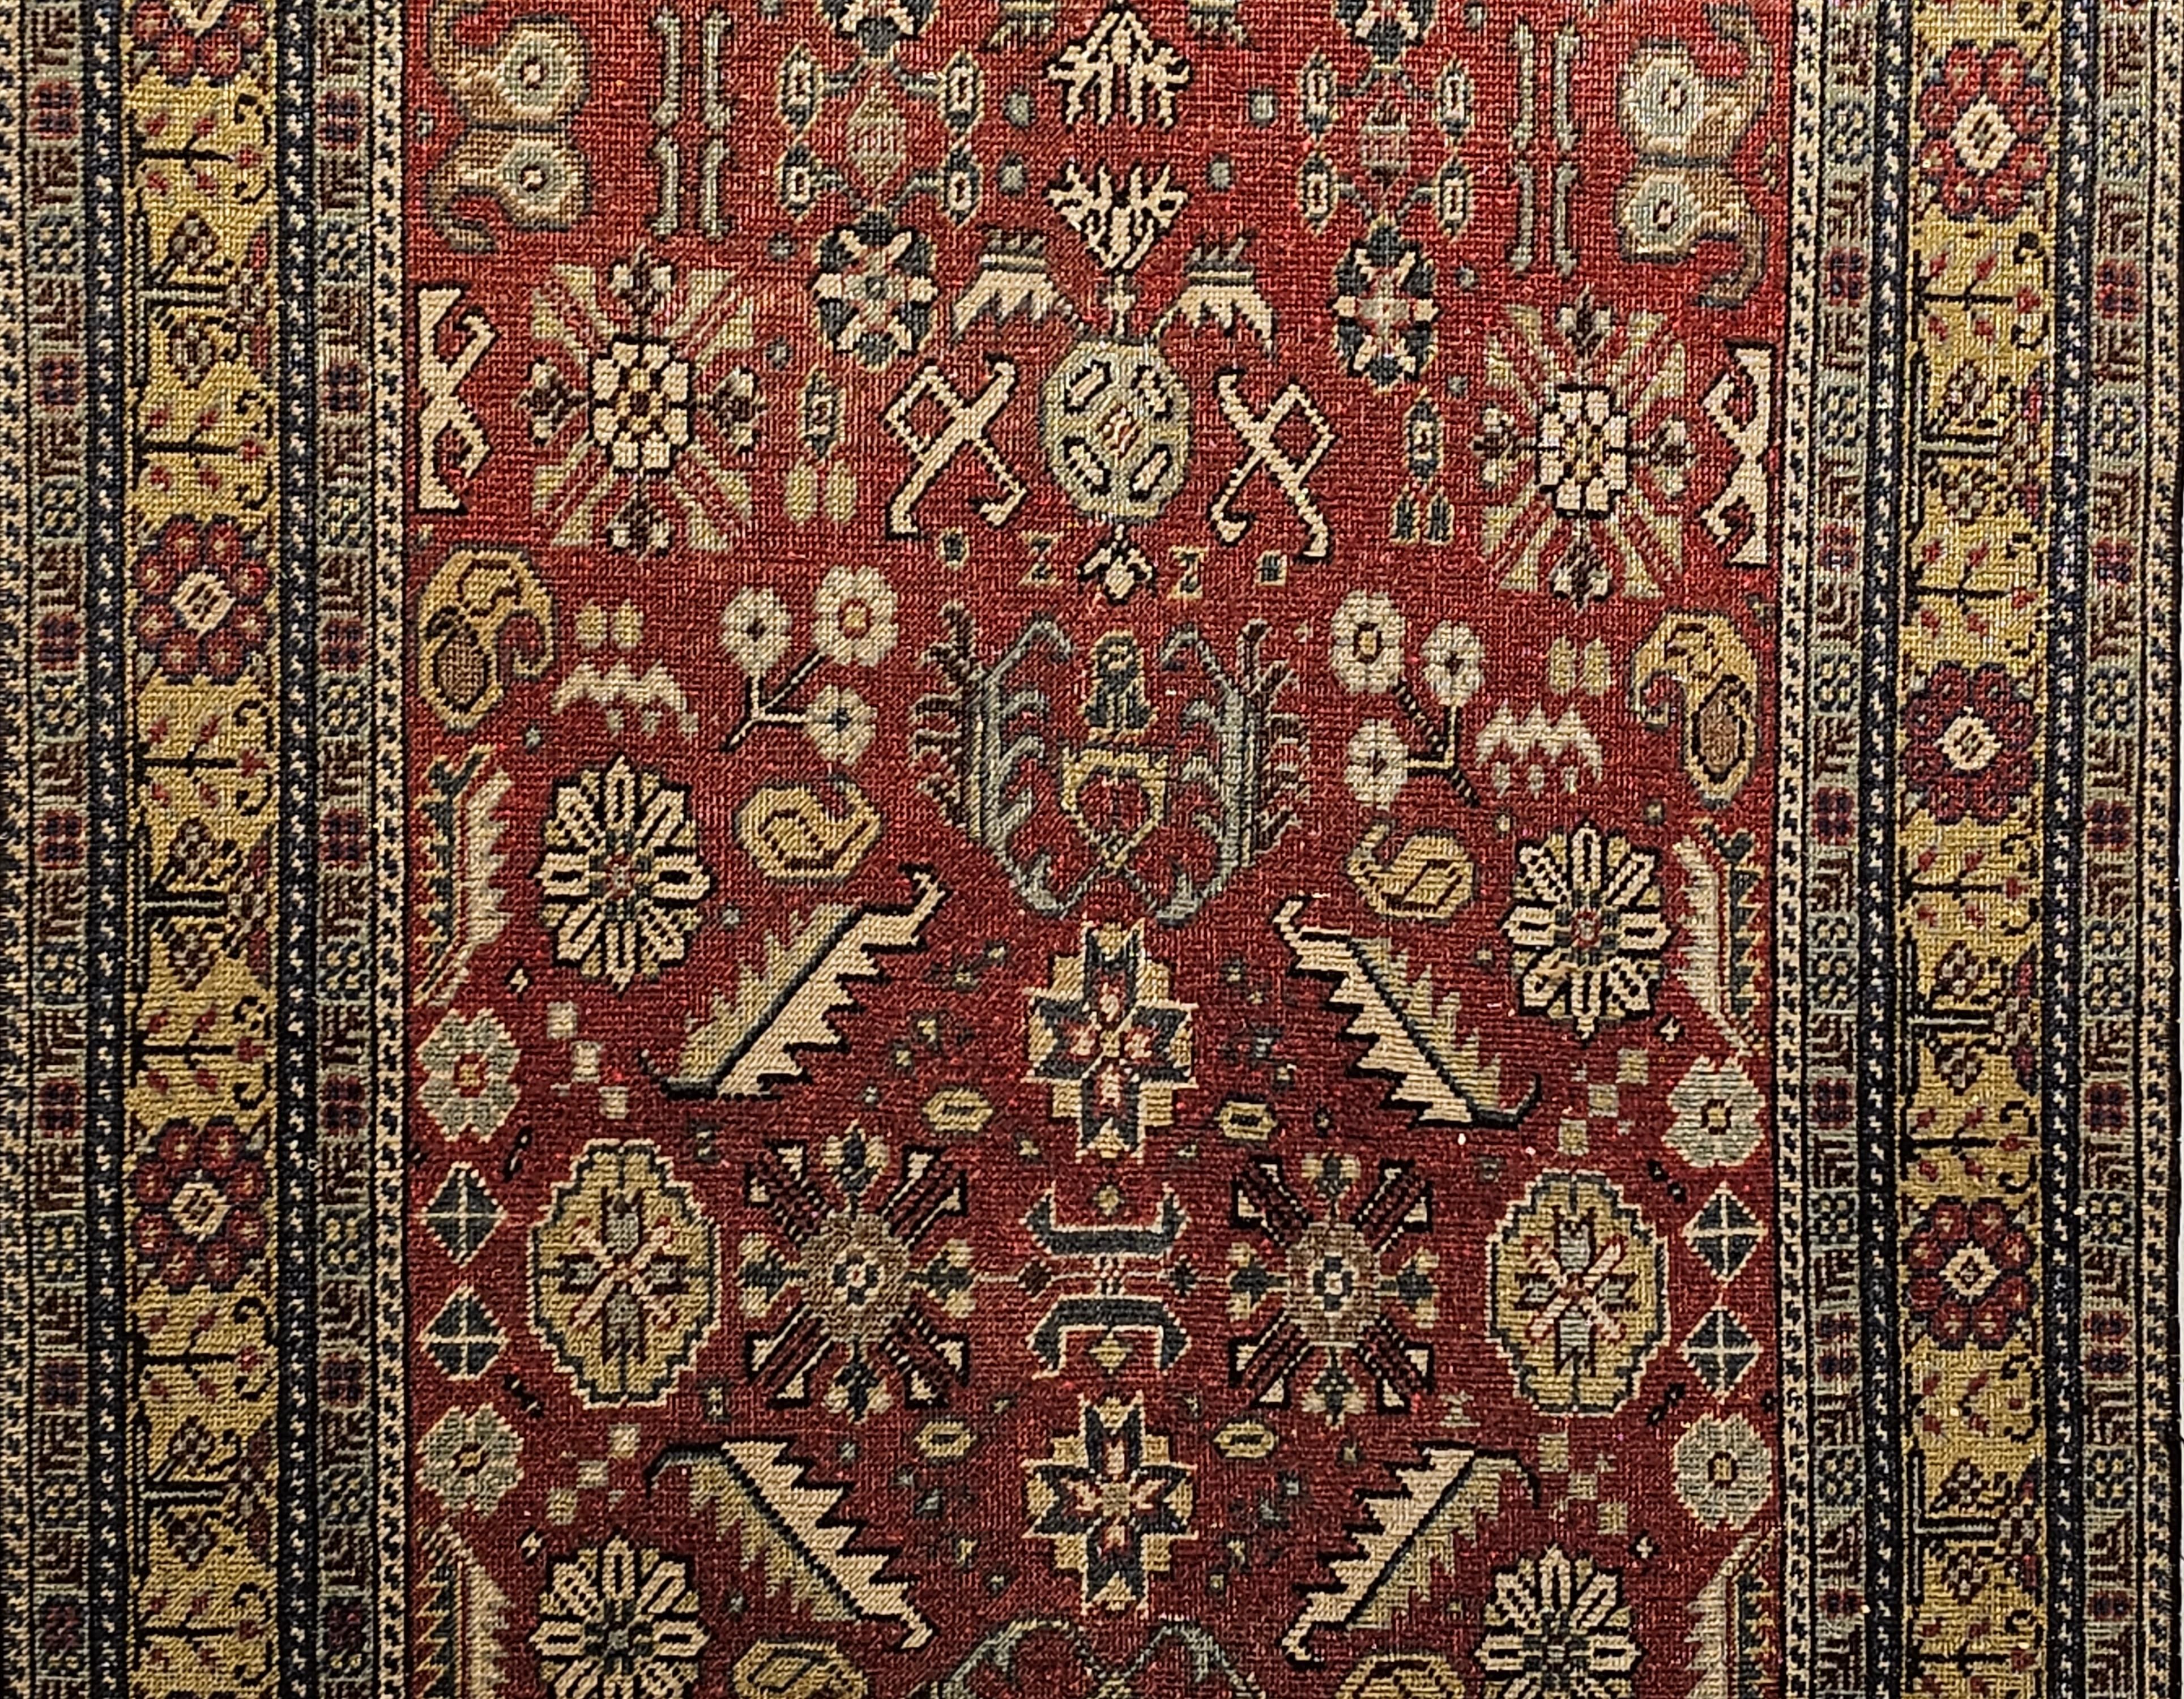 Early 20th Century Vintage Khotan Area Rug in Allover Geometric Pattern on Brick Red, Yellow, Ivory For Sale